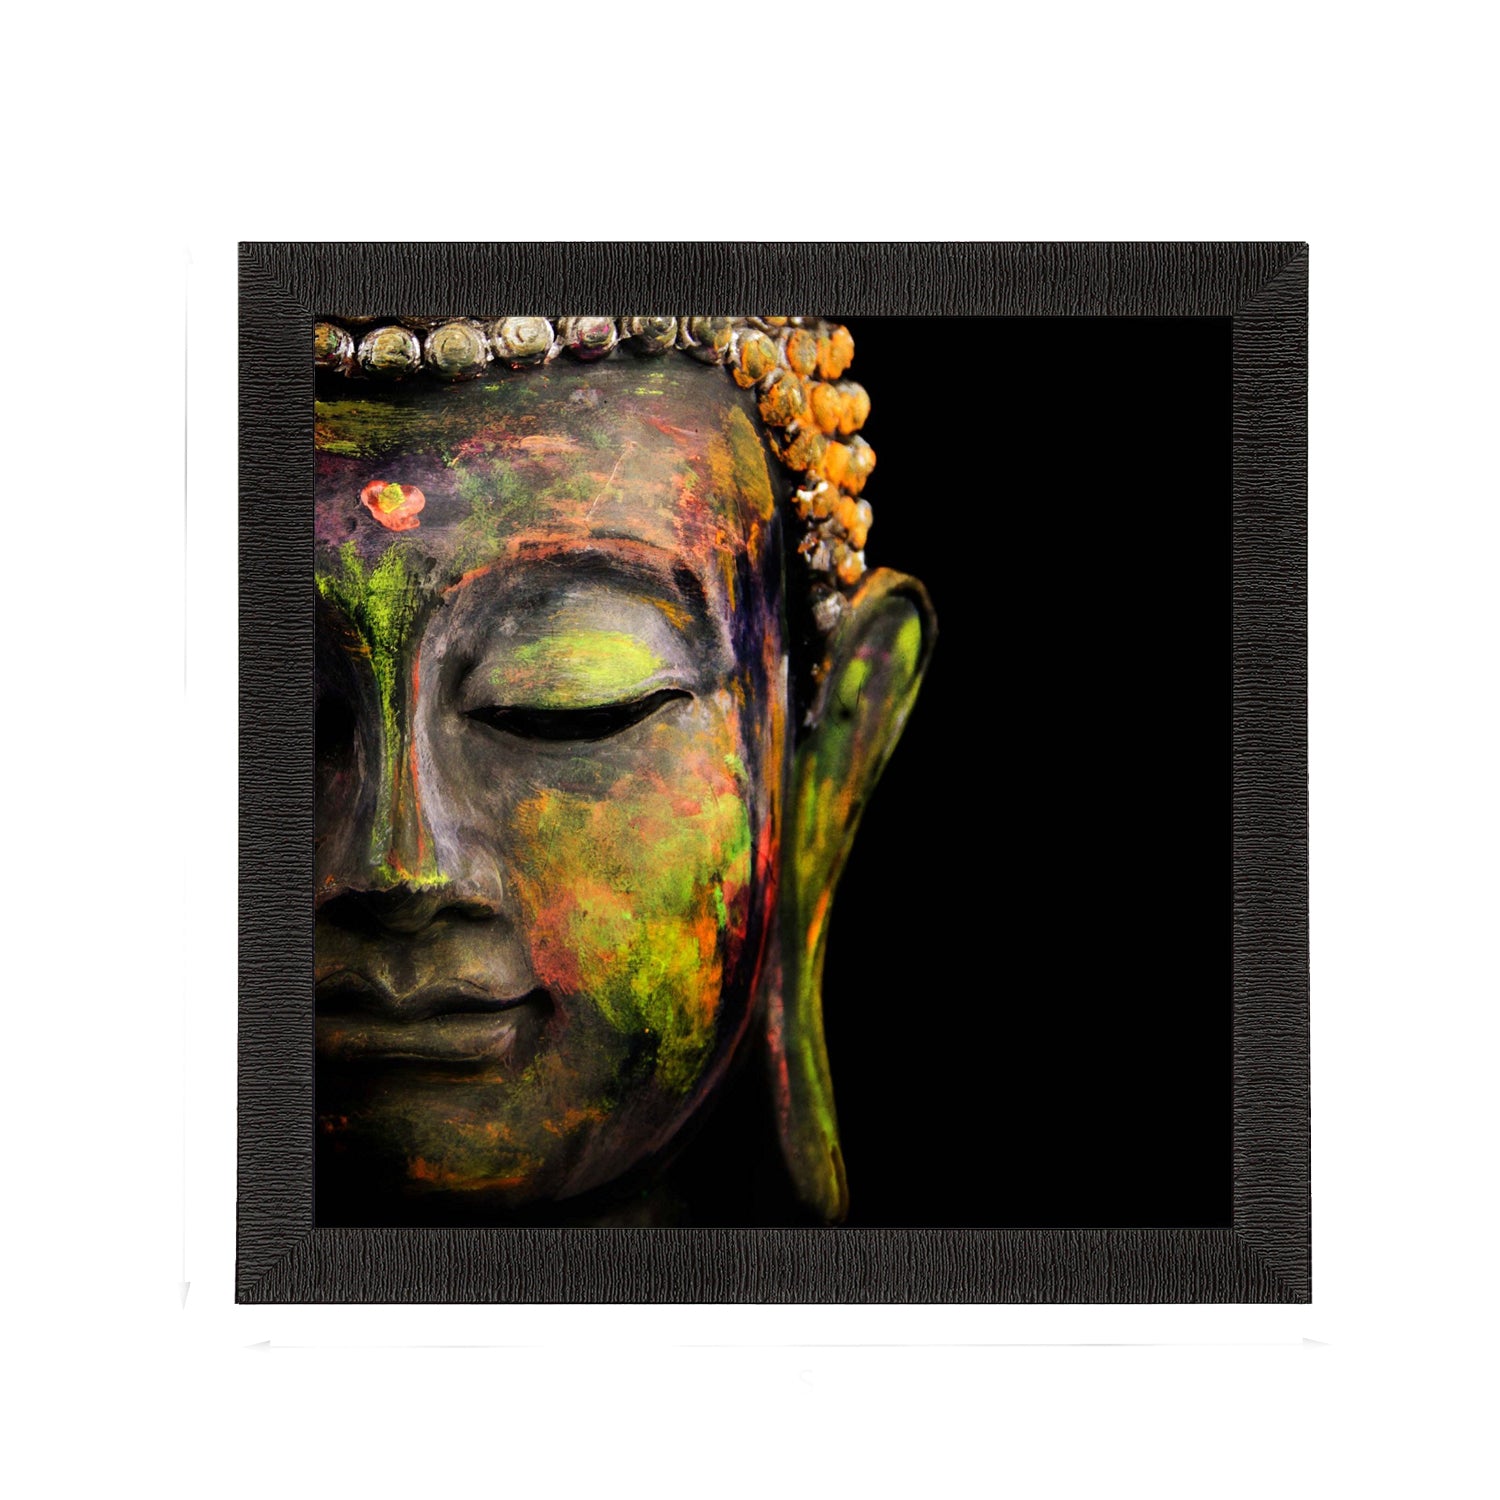 Enlightening Lord Buddha Face Painting Digital Printed Religious Wall Art